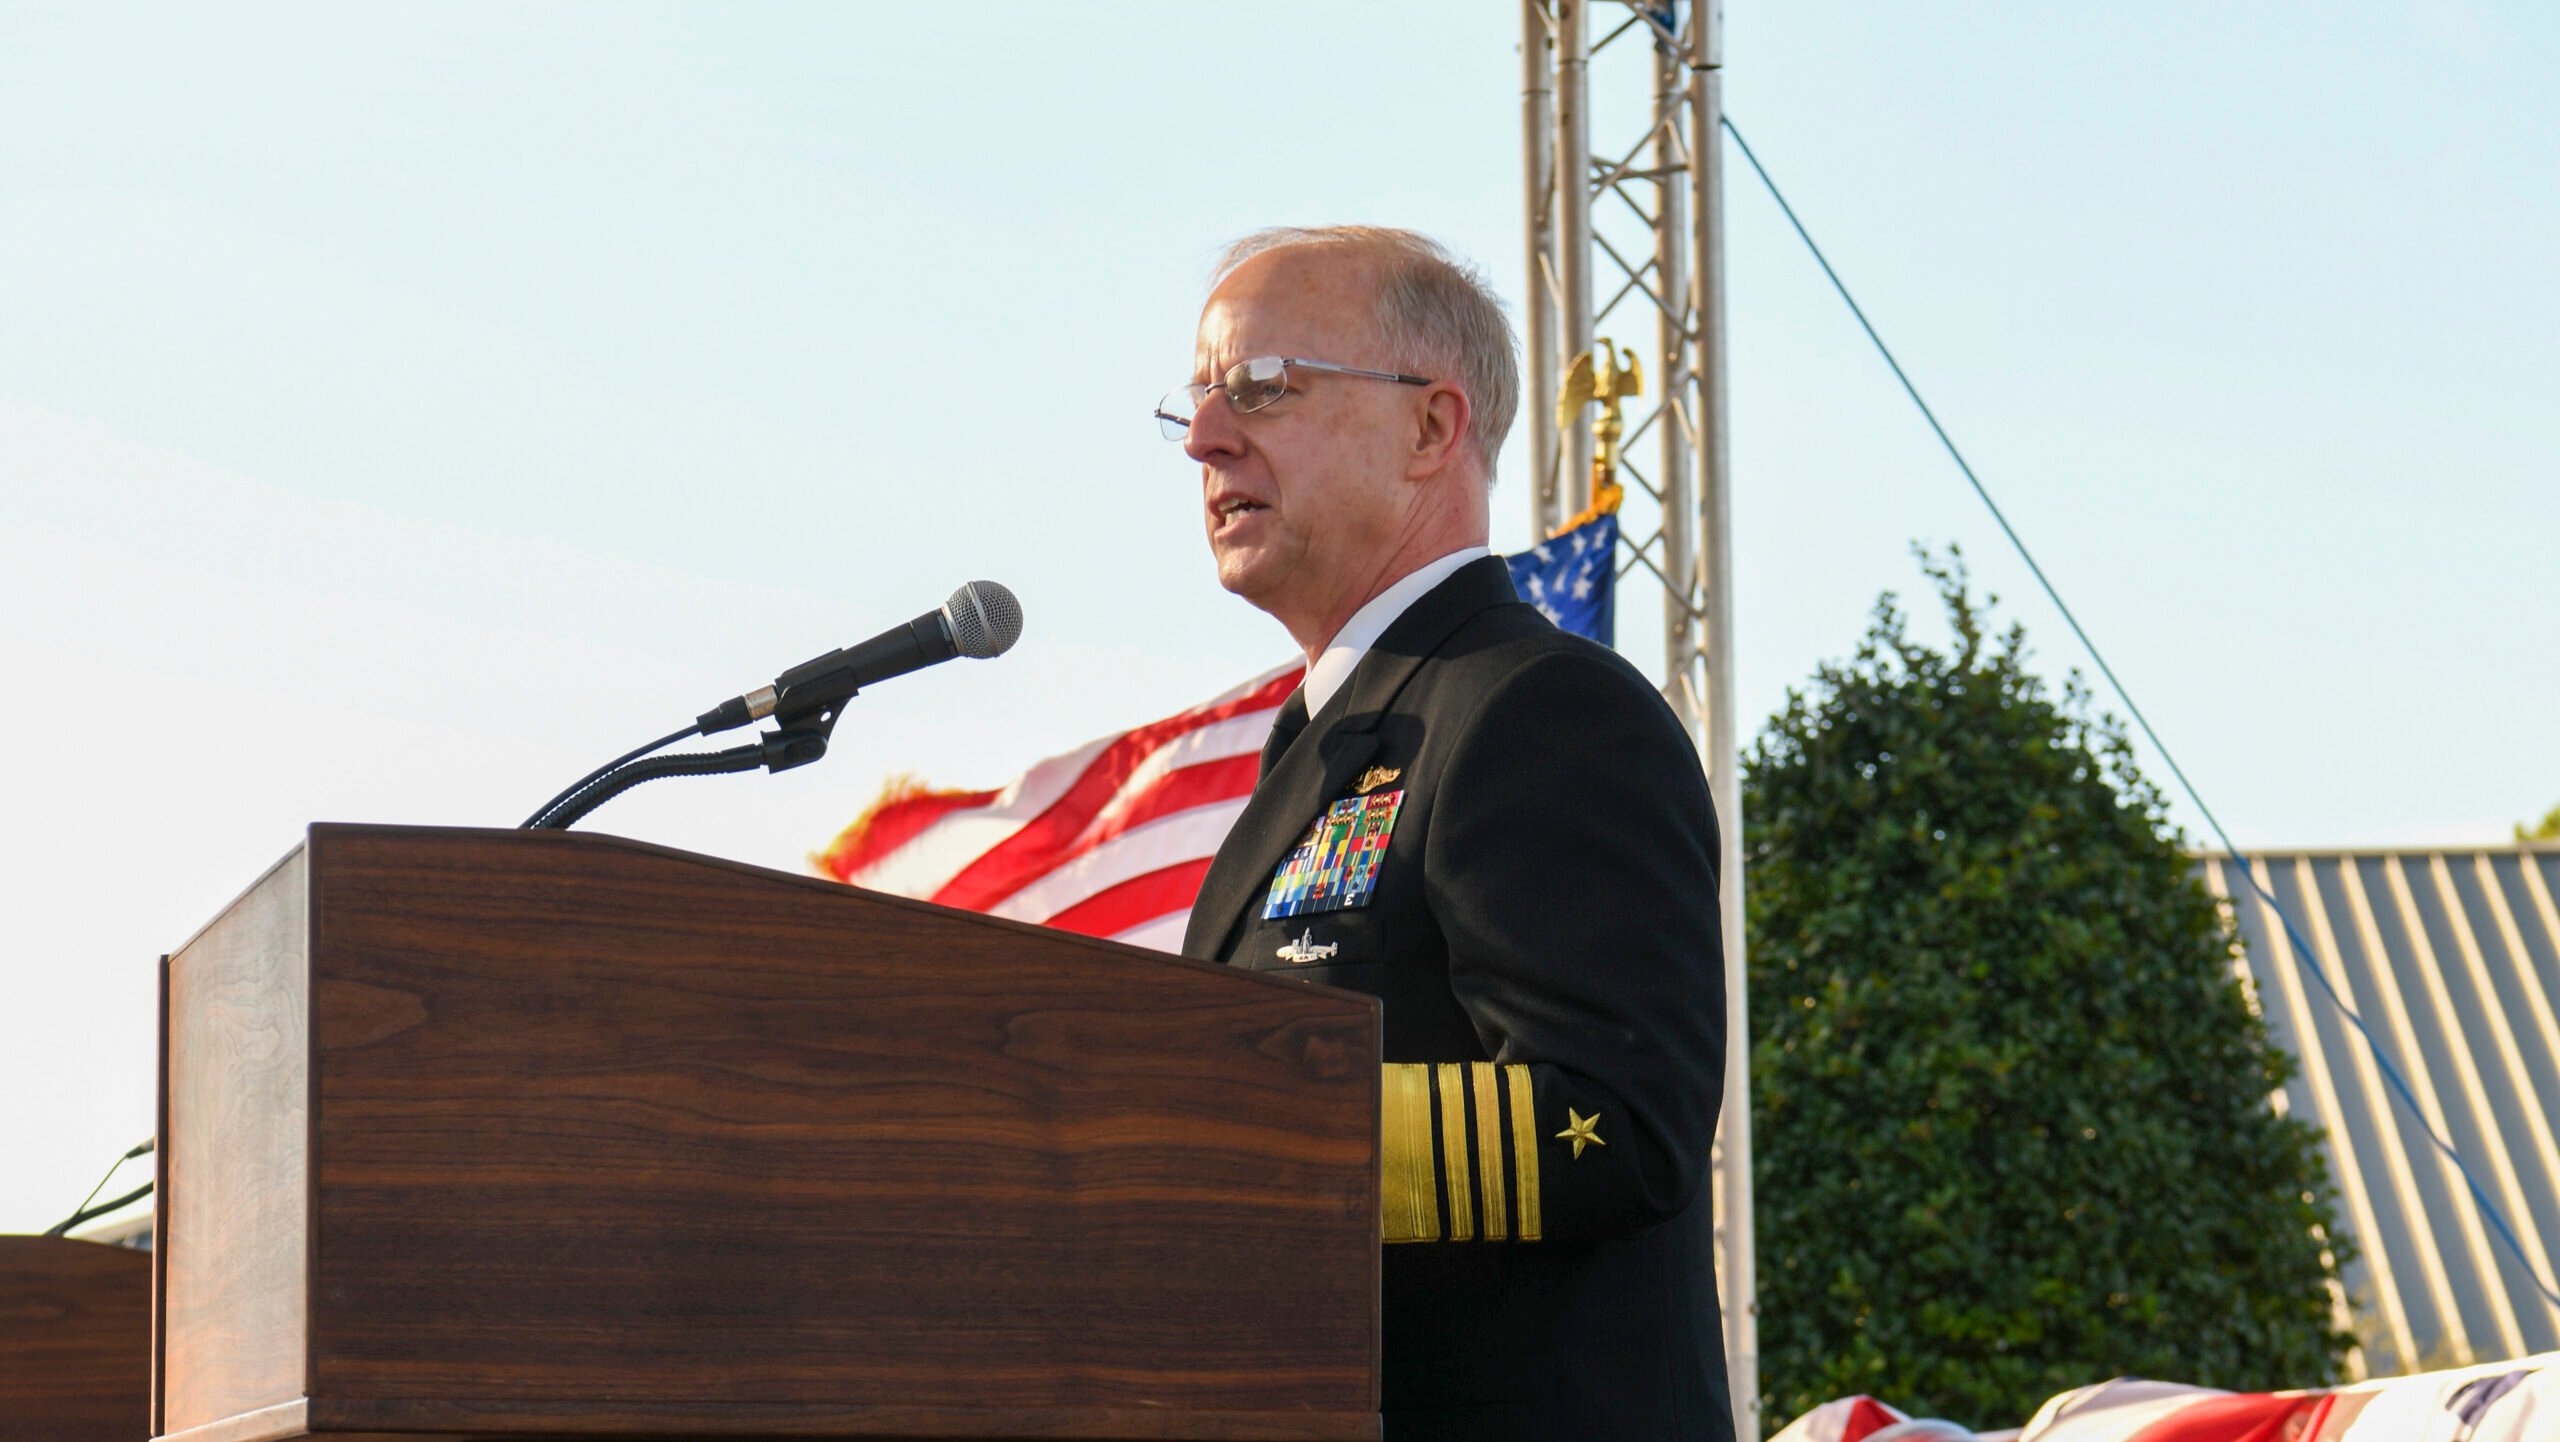 After last year’s warning shot, Navy admiral credits industry for stepping up